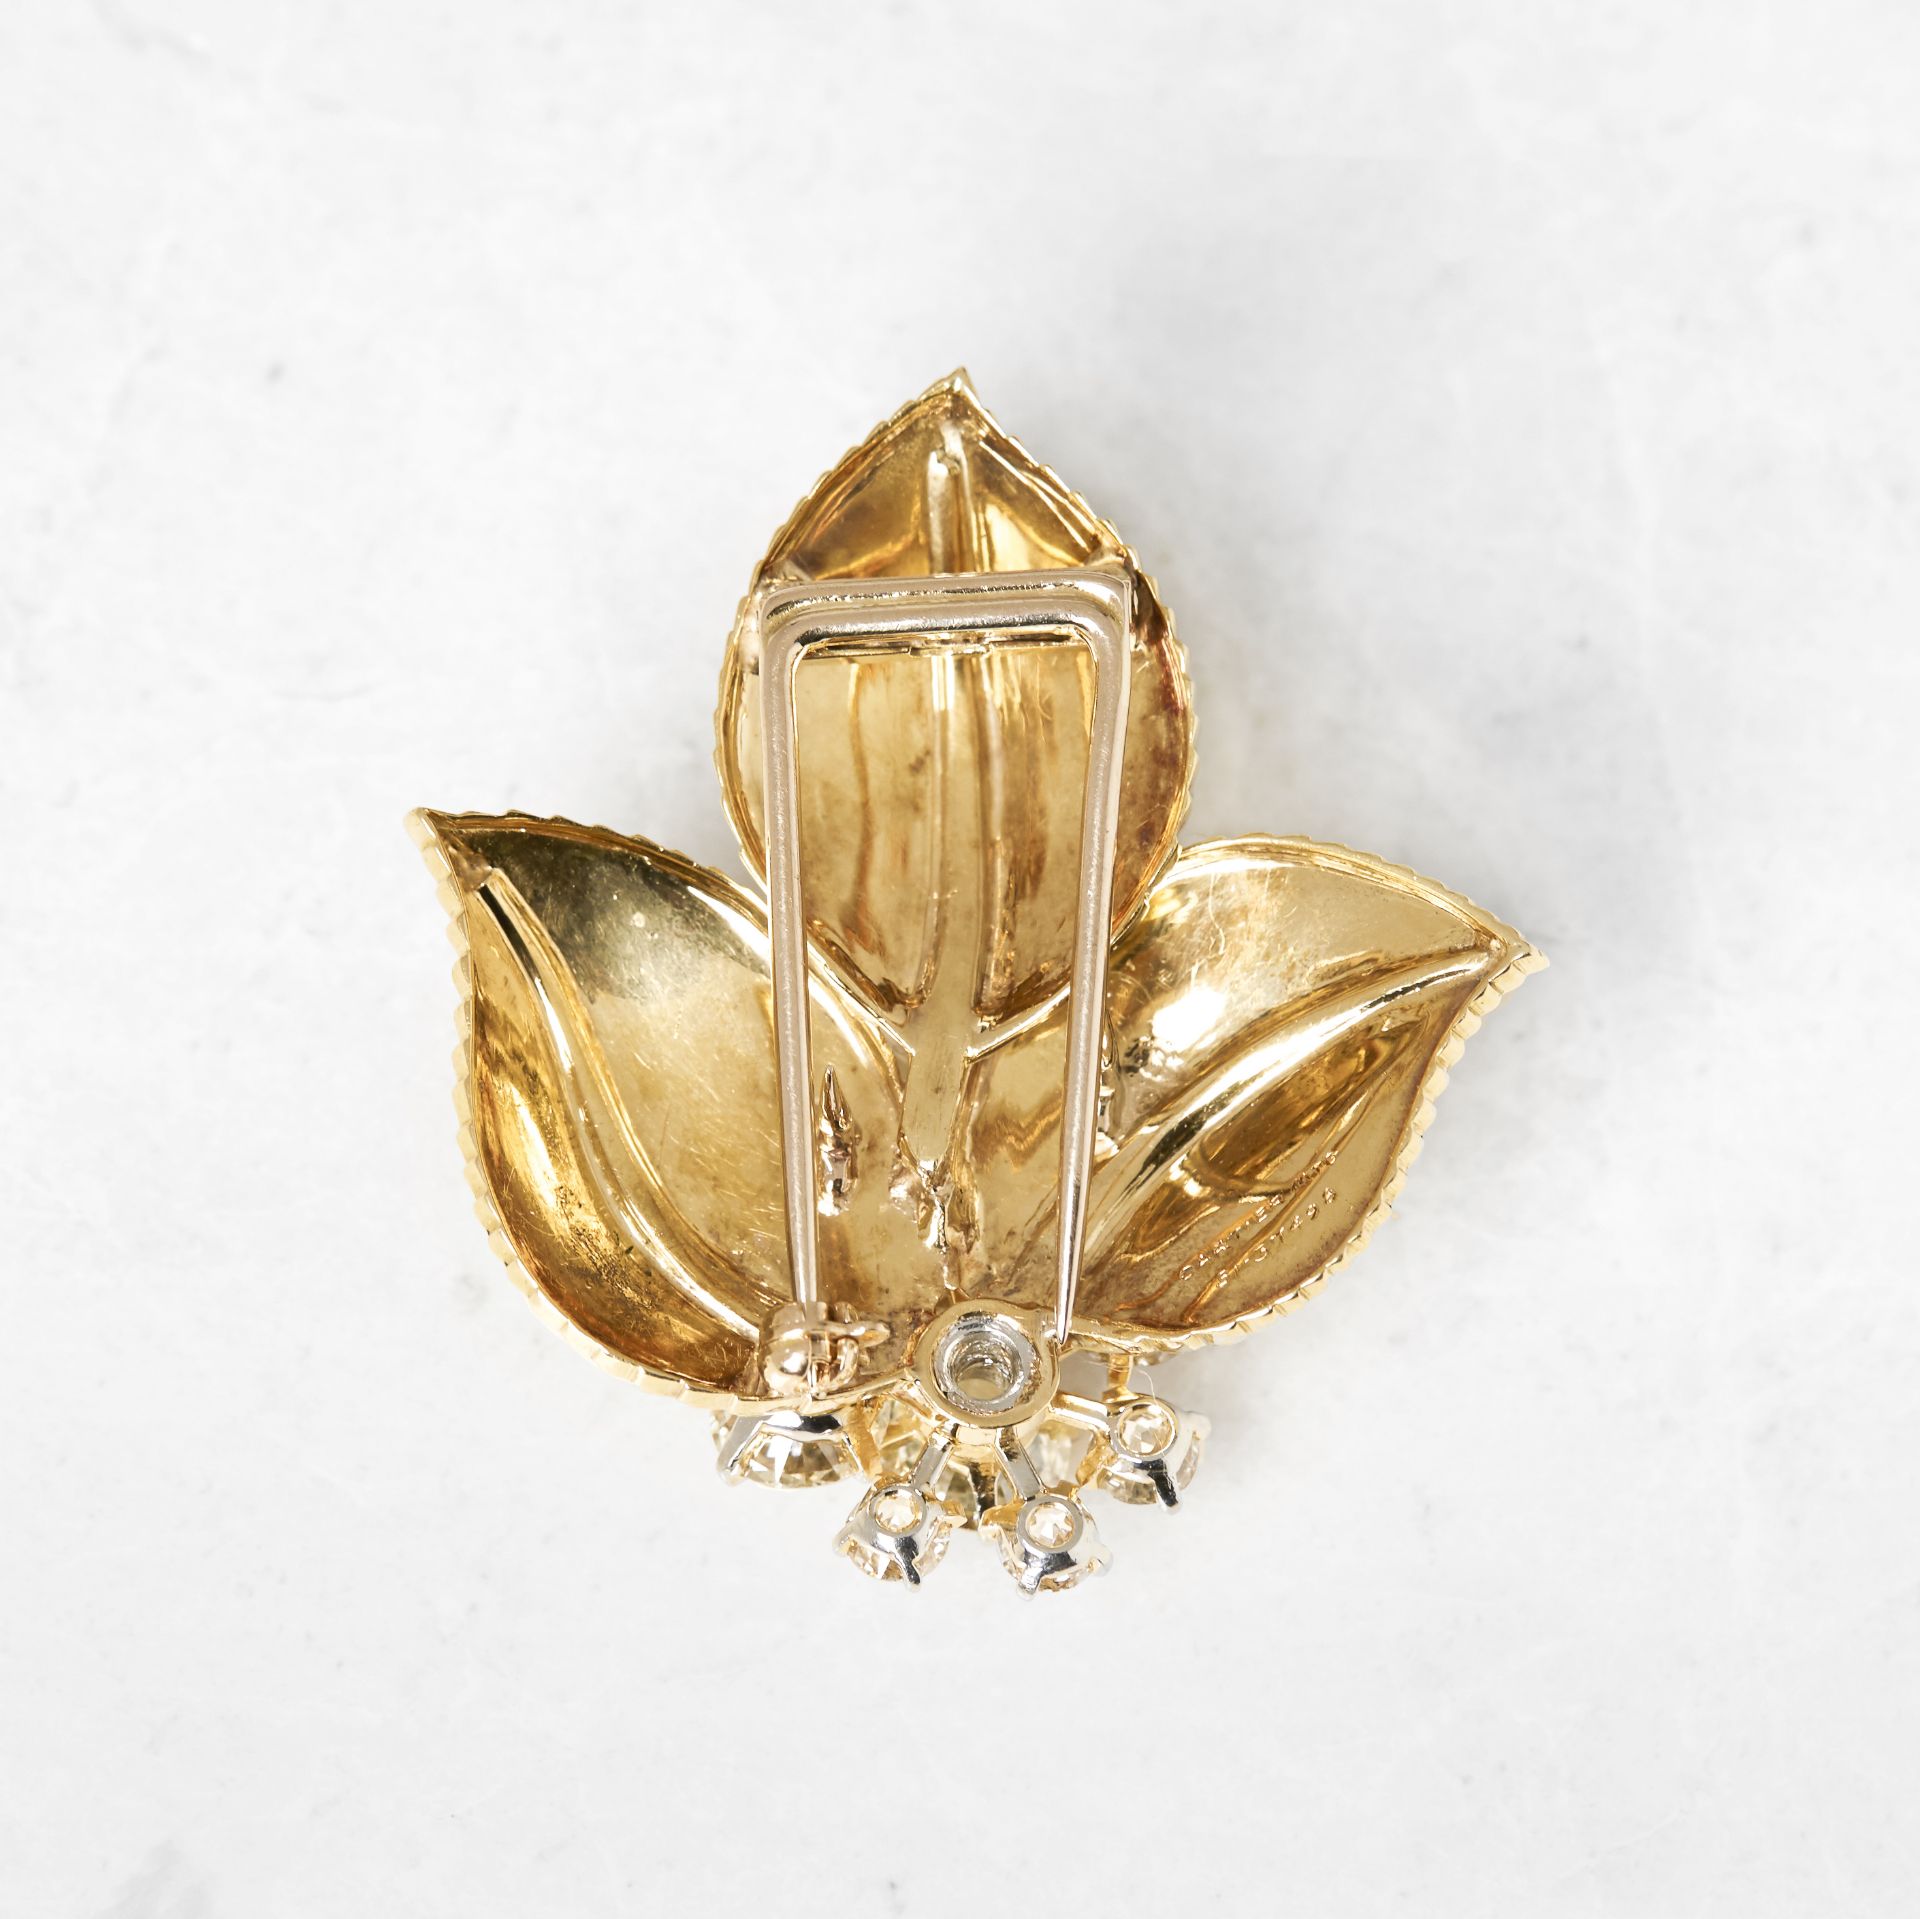 Cartier 18k Yellow Gold Diamond Vintage Leaf Brooch - Image 2 of 8